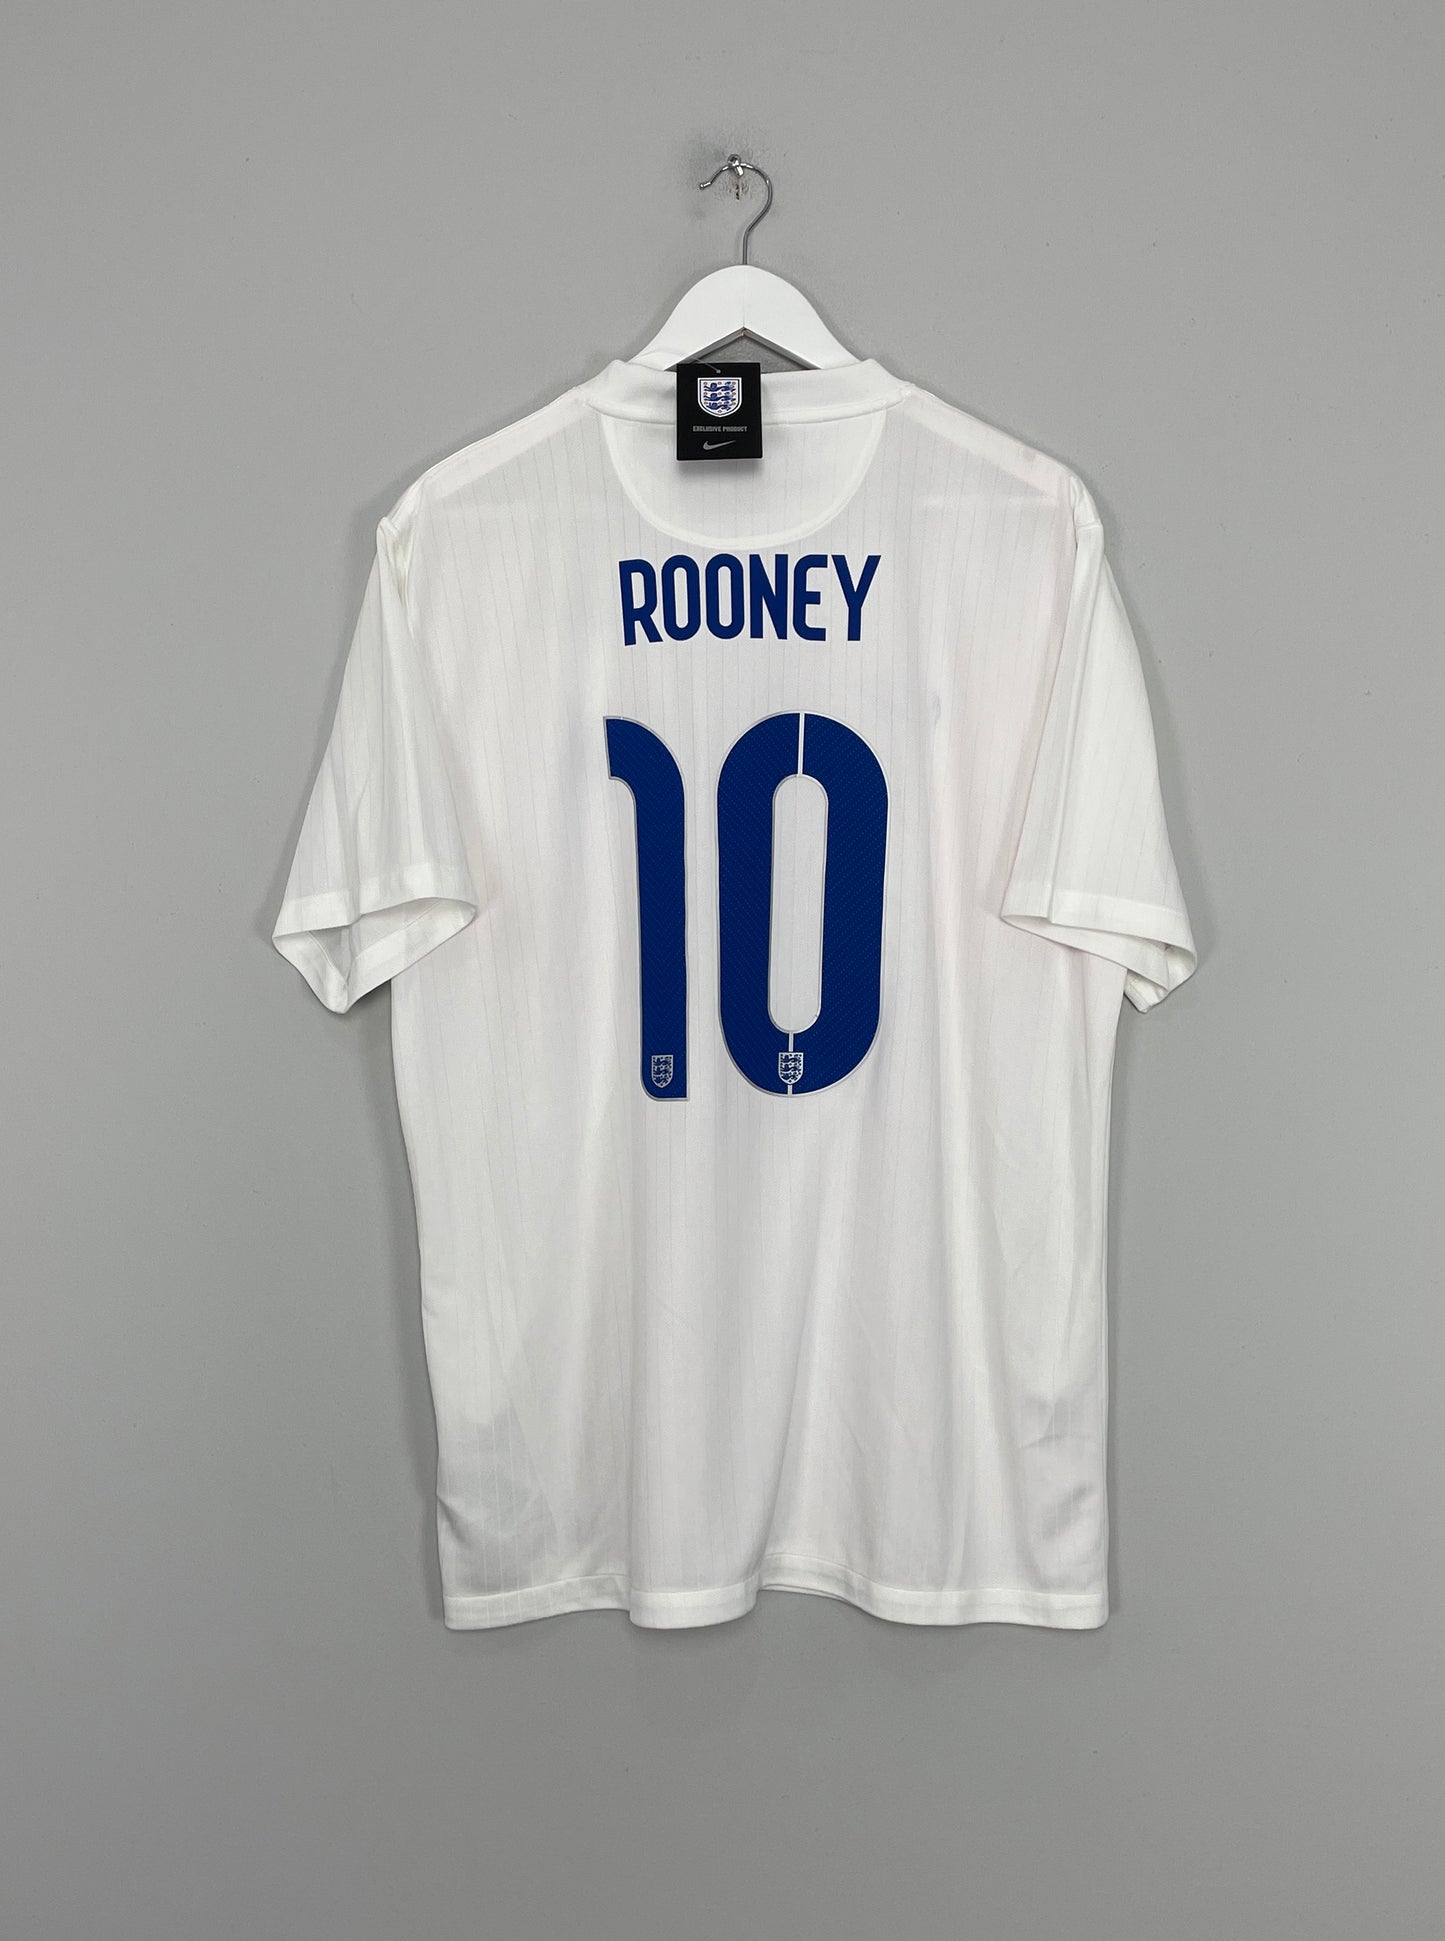 Image of the England Rooney shirt from the 2014/15 season